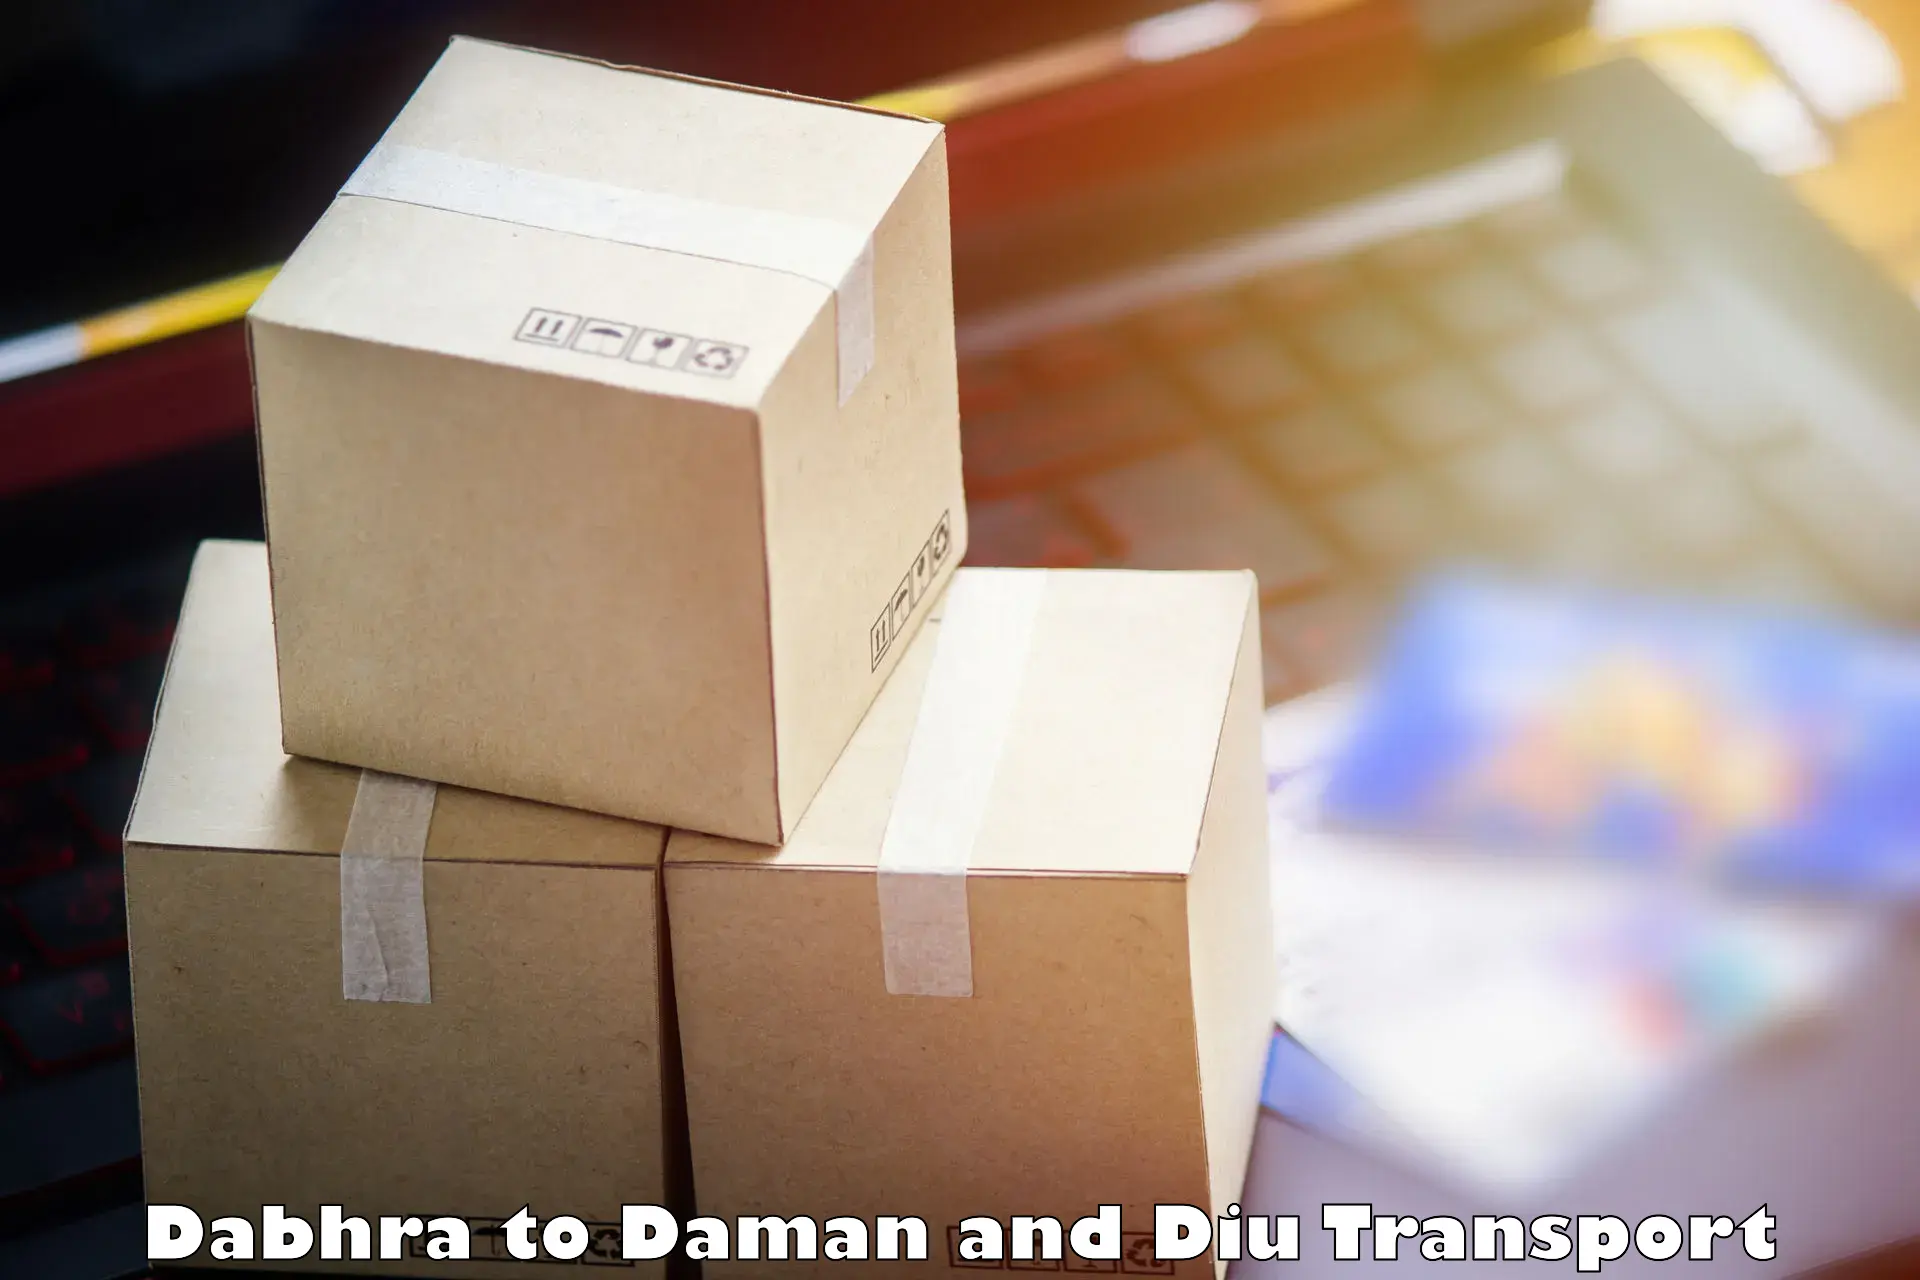 Transport shared services Dabhra to Daman and Diu